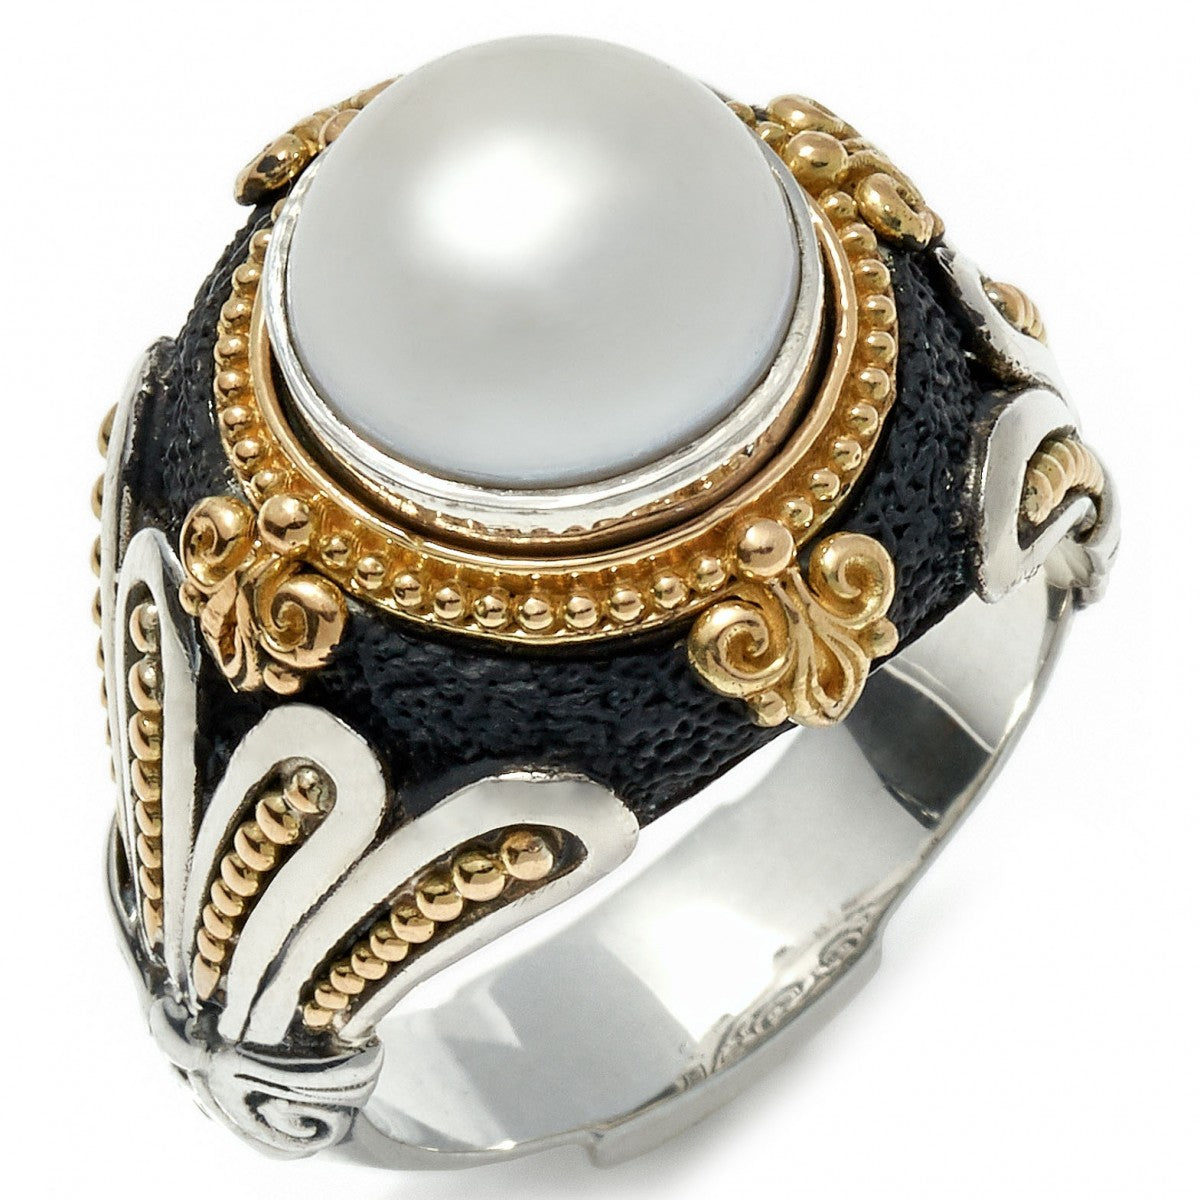 Konstantino Women’s Sterling Silver, 18K Gold and Pearl Ring